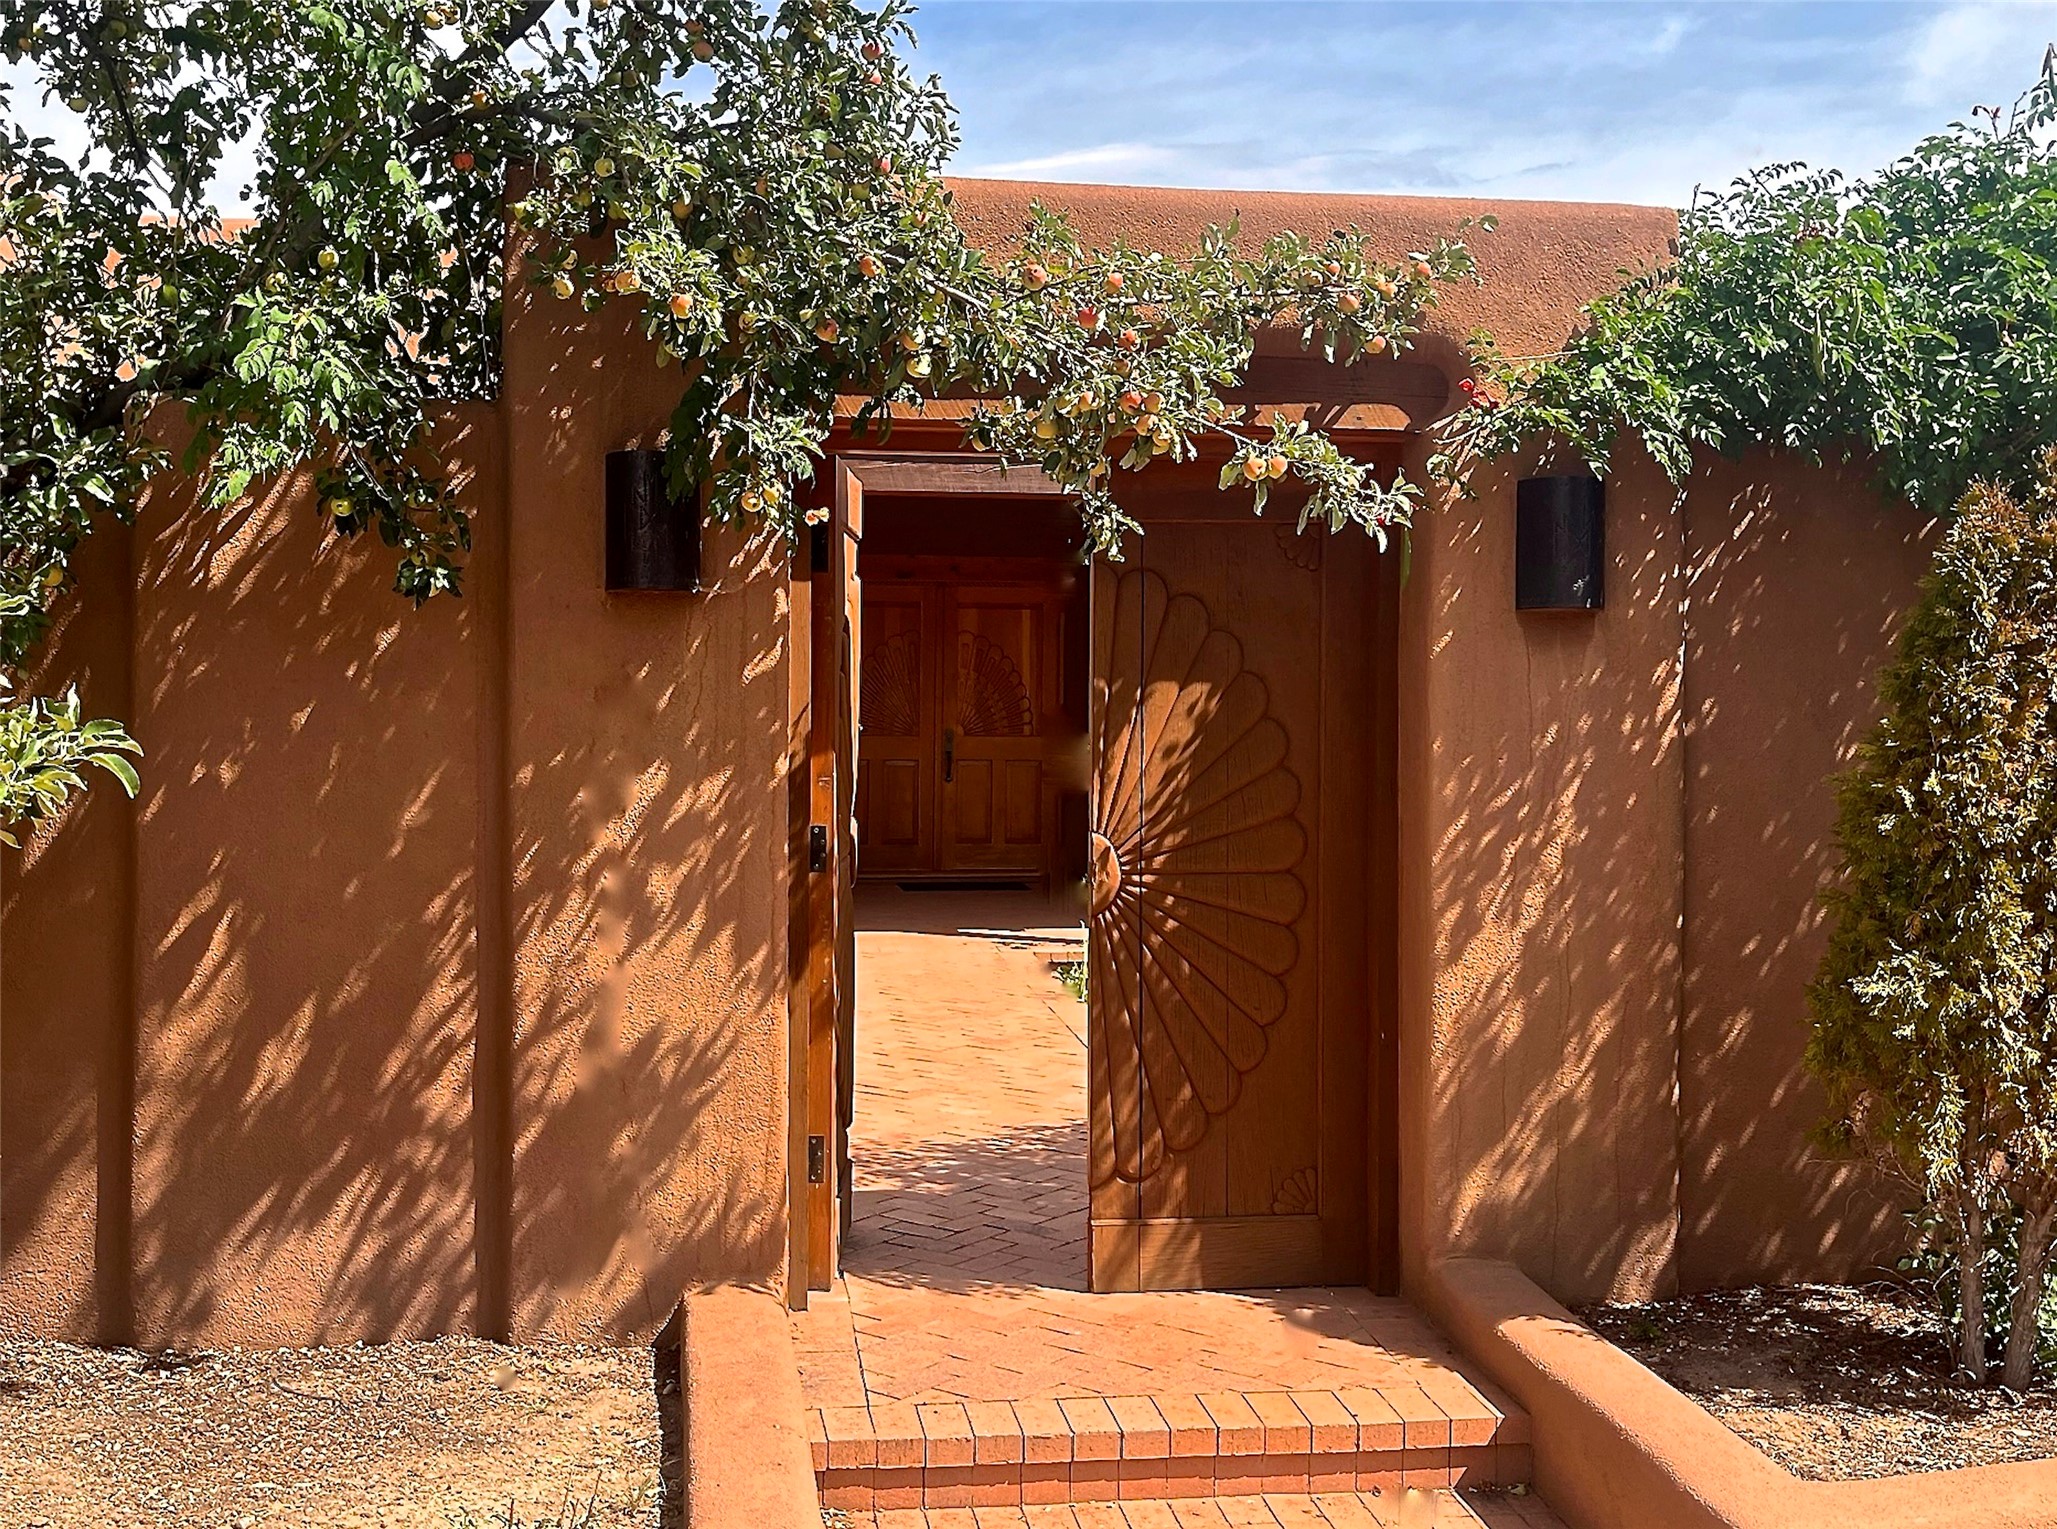 13 Hawthorne Circle, Santa Fe, New Mexico 87506, 3 Bedrooms Bedrooms, ,4 BathroomsBathrooms,Residential,For Sale,13 Hawthorne Circle,202401251